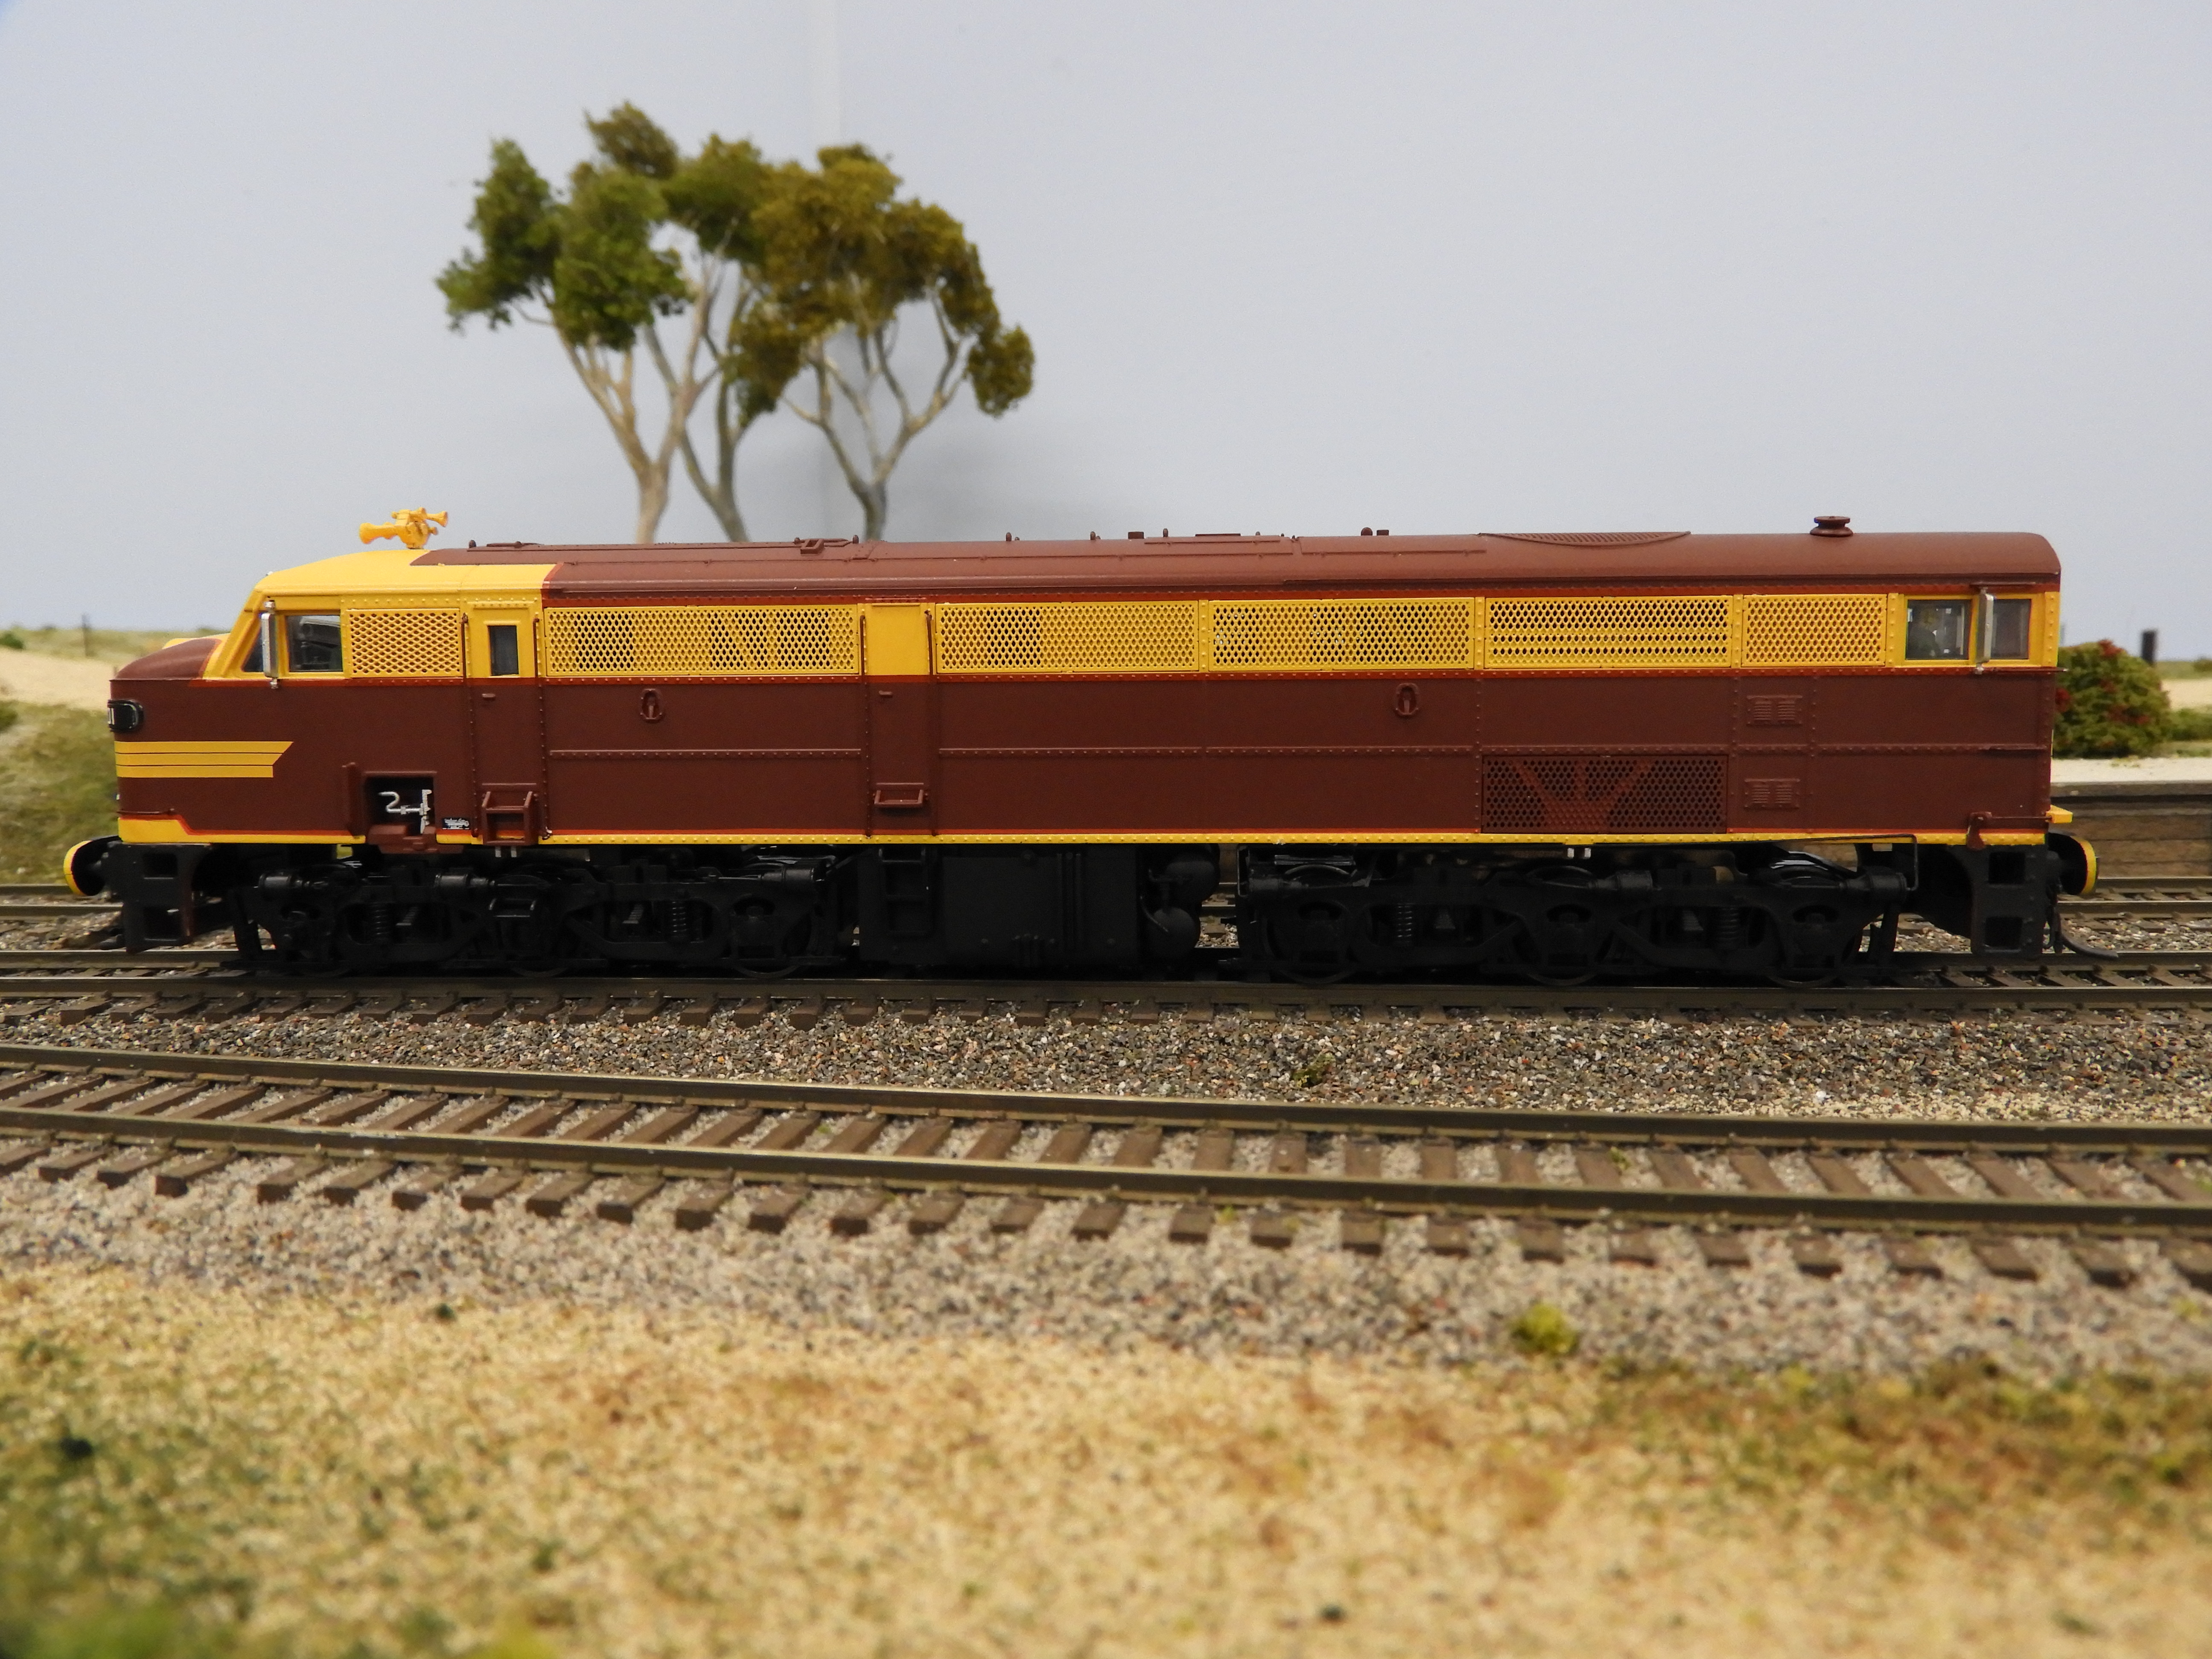 NSW 44 CLASS HO SCALE - 4401 - EARLY ERA - ORIGINAL (INDIAN RED) - $295